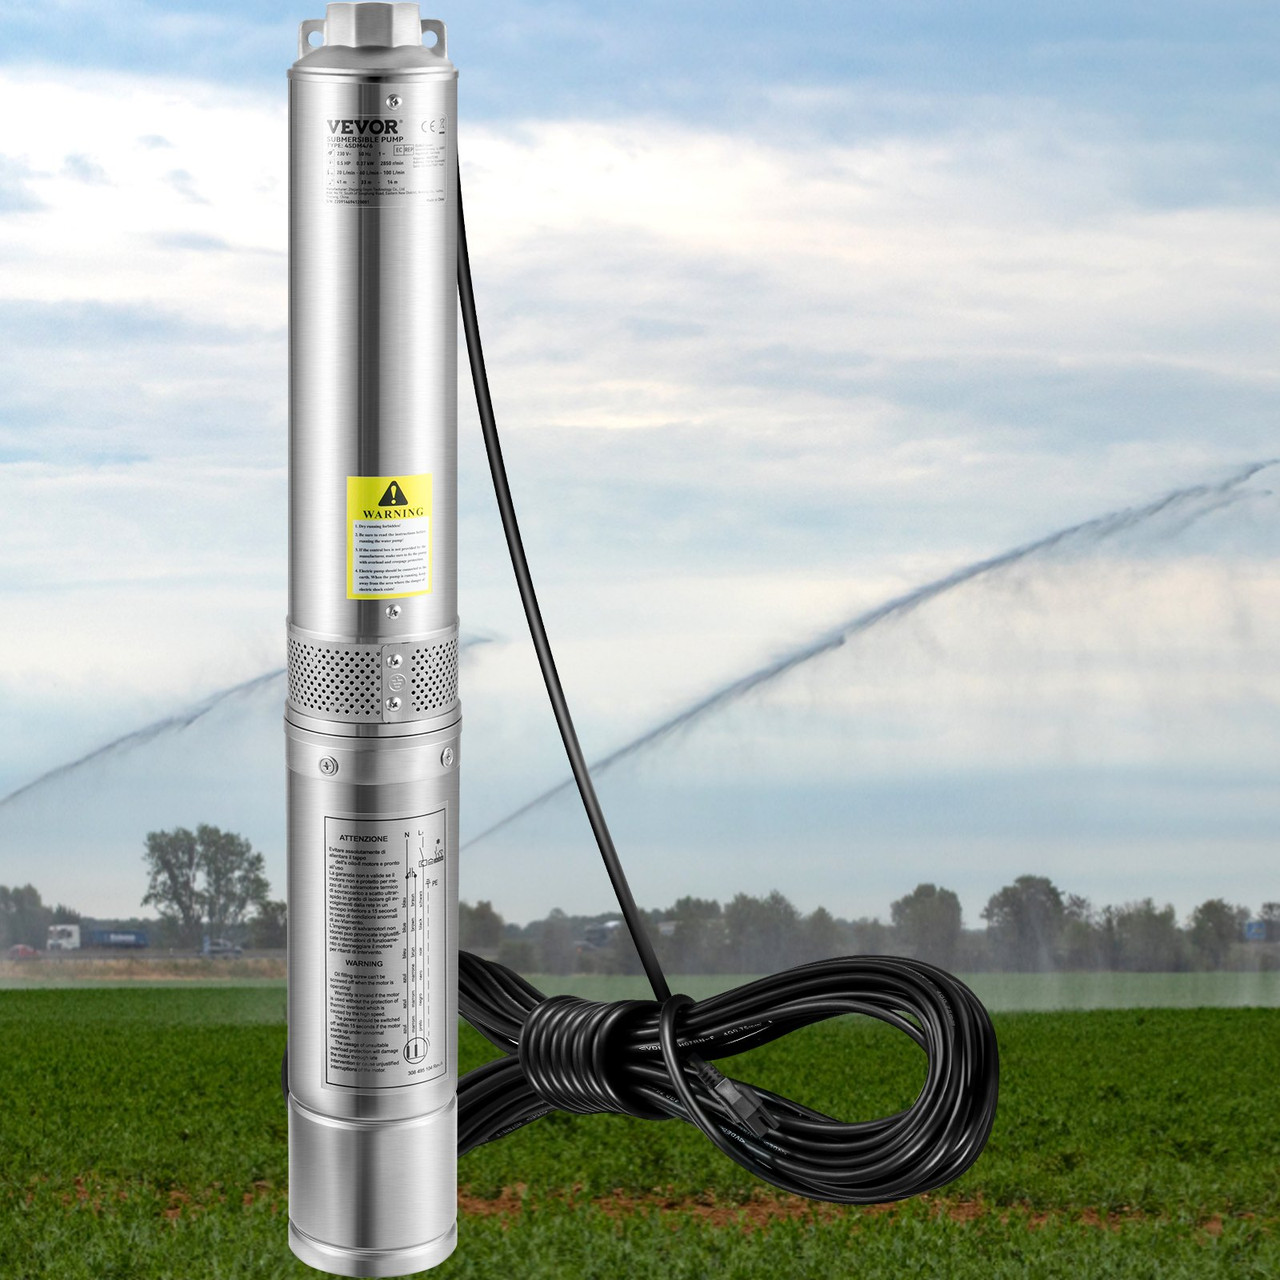 VEVOR Deep Well Submersible Pump, 1HP 230V/60Hz, 37gpm Flow 207ft Head, with 33ft Electric Cord, 4" Stainless Steel Water Pump for Industrial, Irrigation&Home Use, IP68 Waterproof Grade